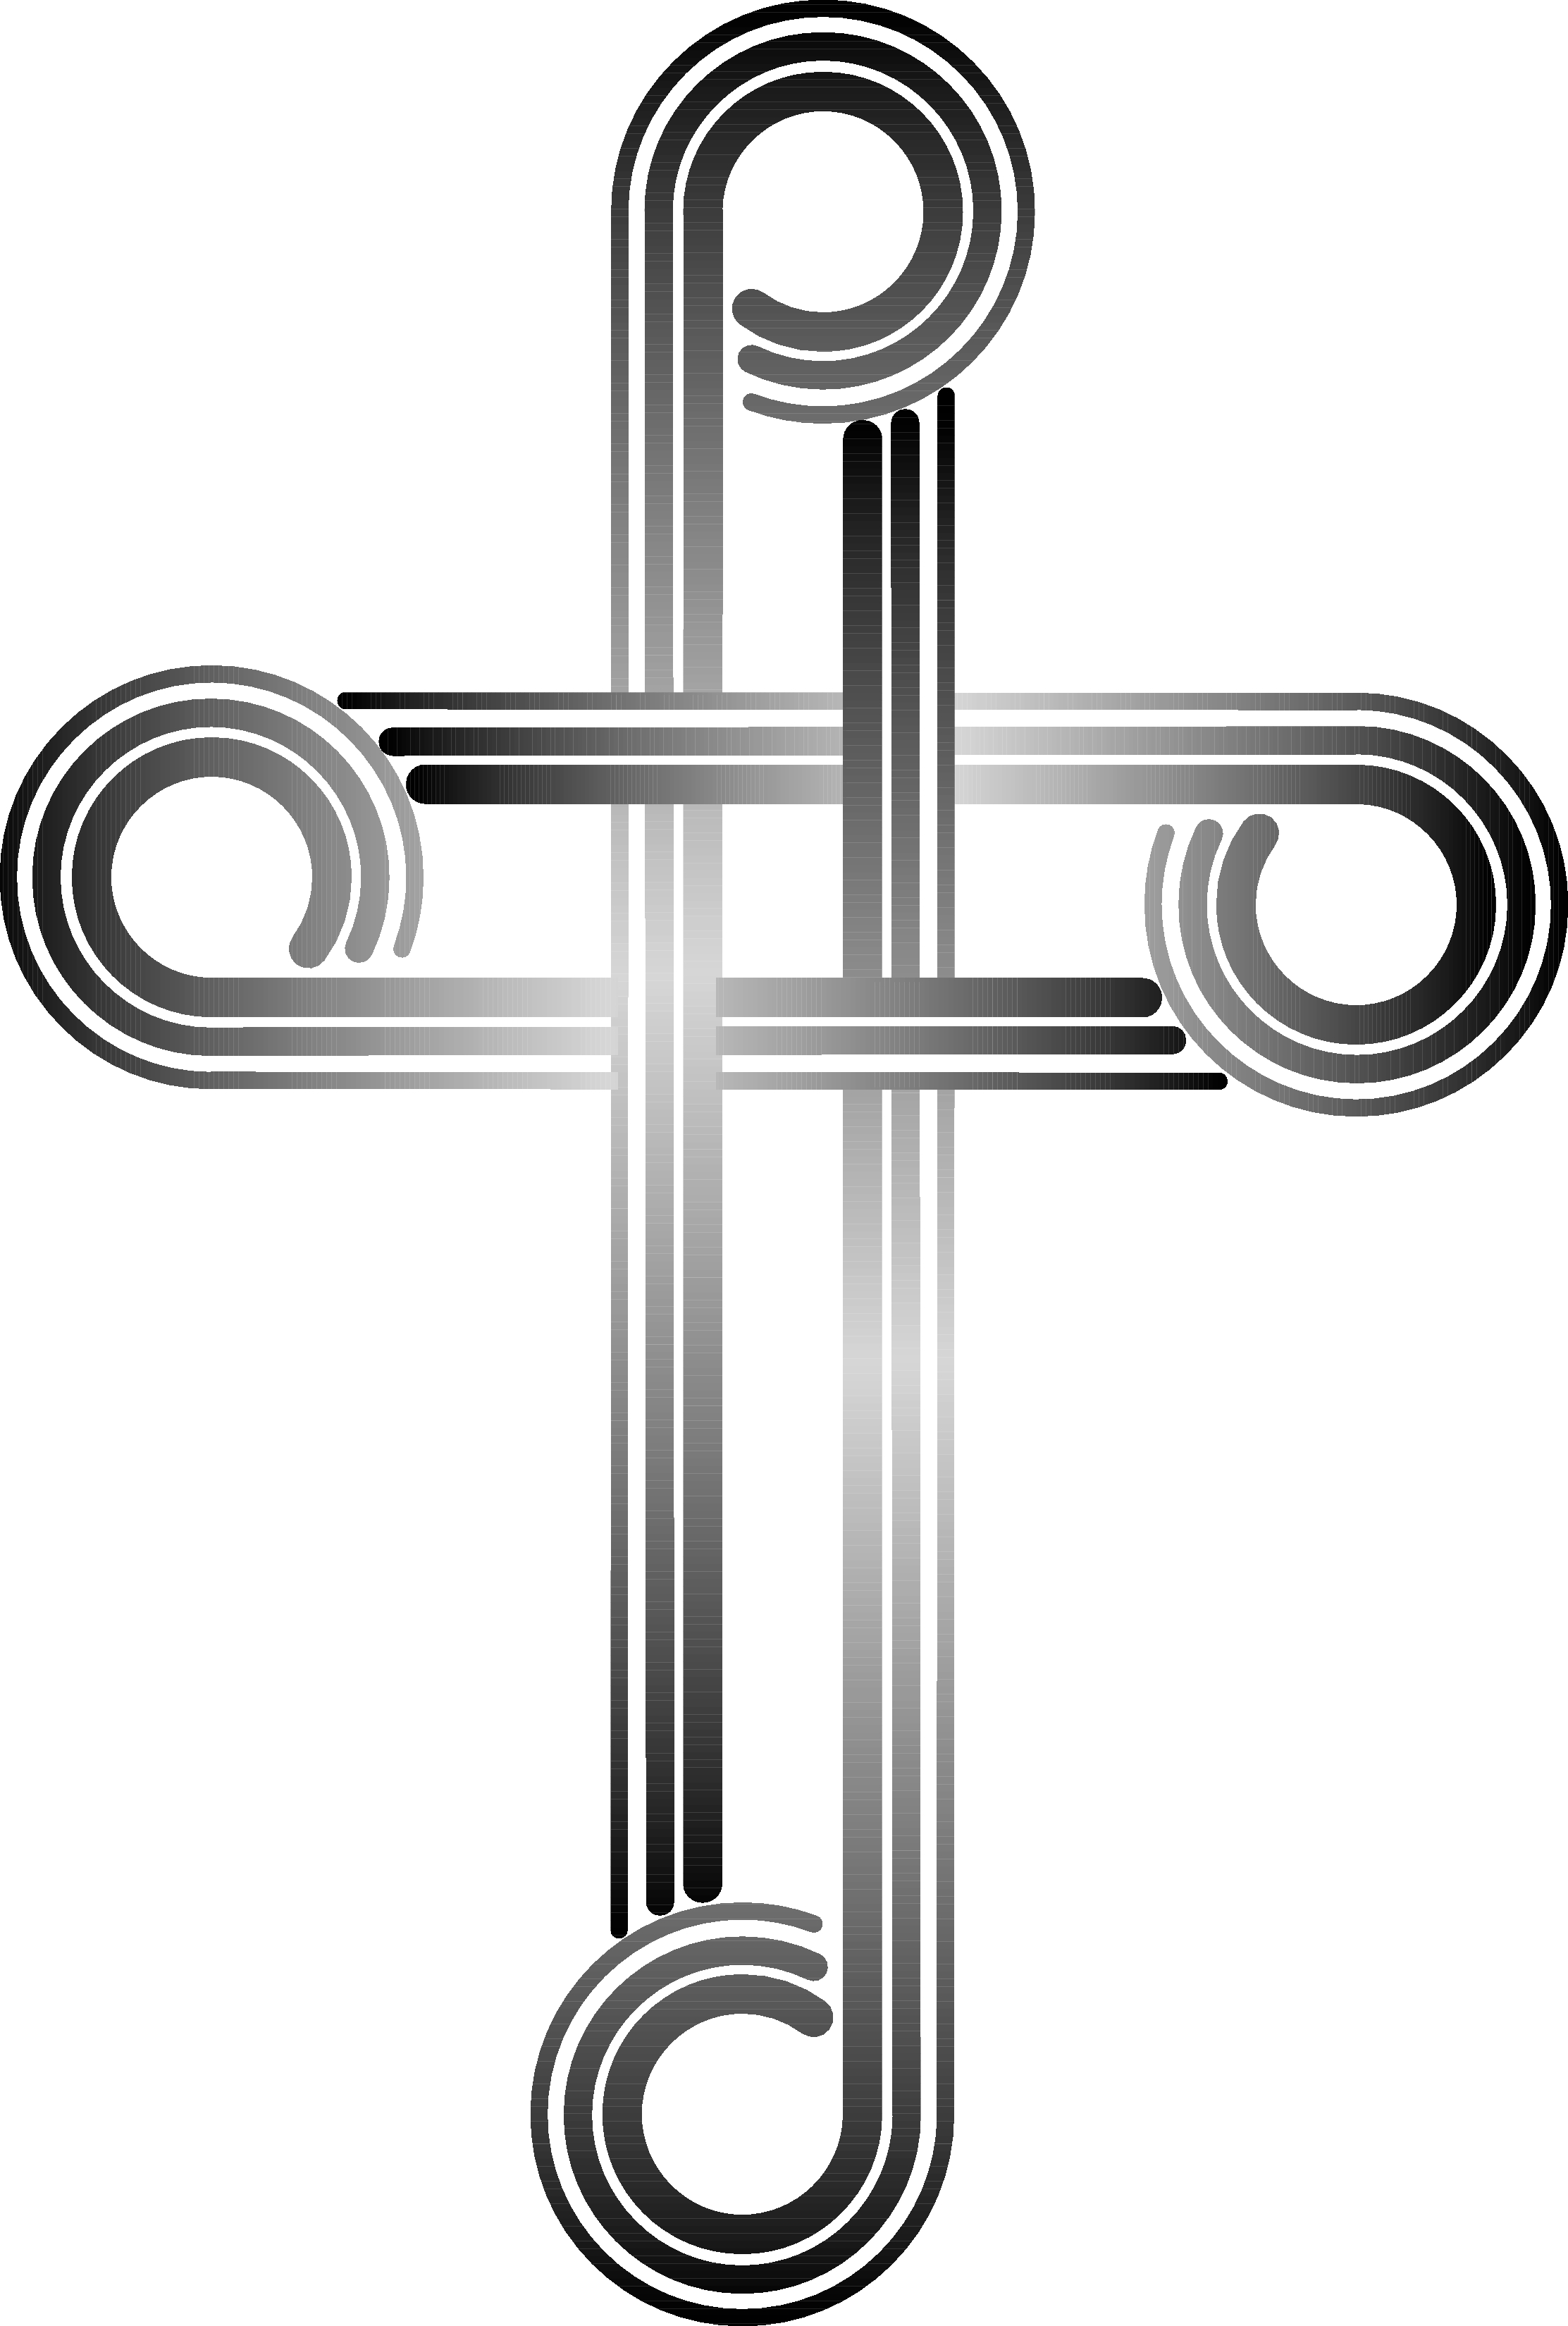 Wooden Cross Clipart Black And White | Clipart library - Free 